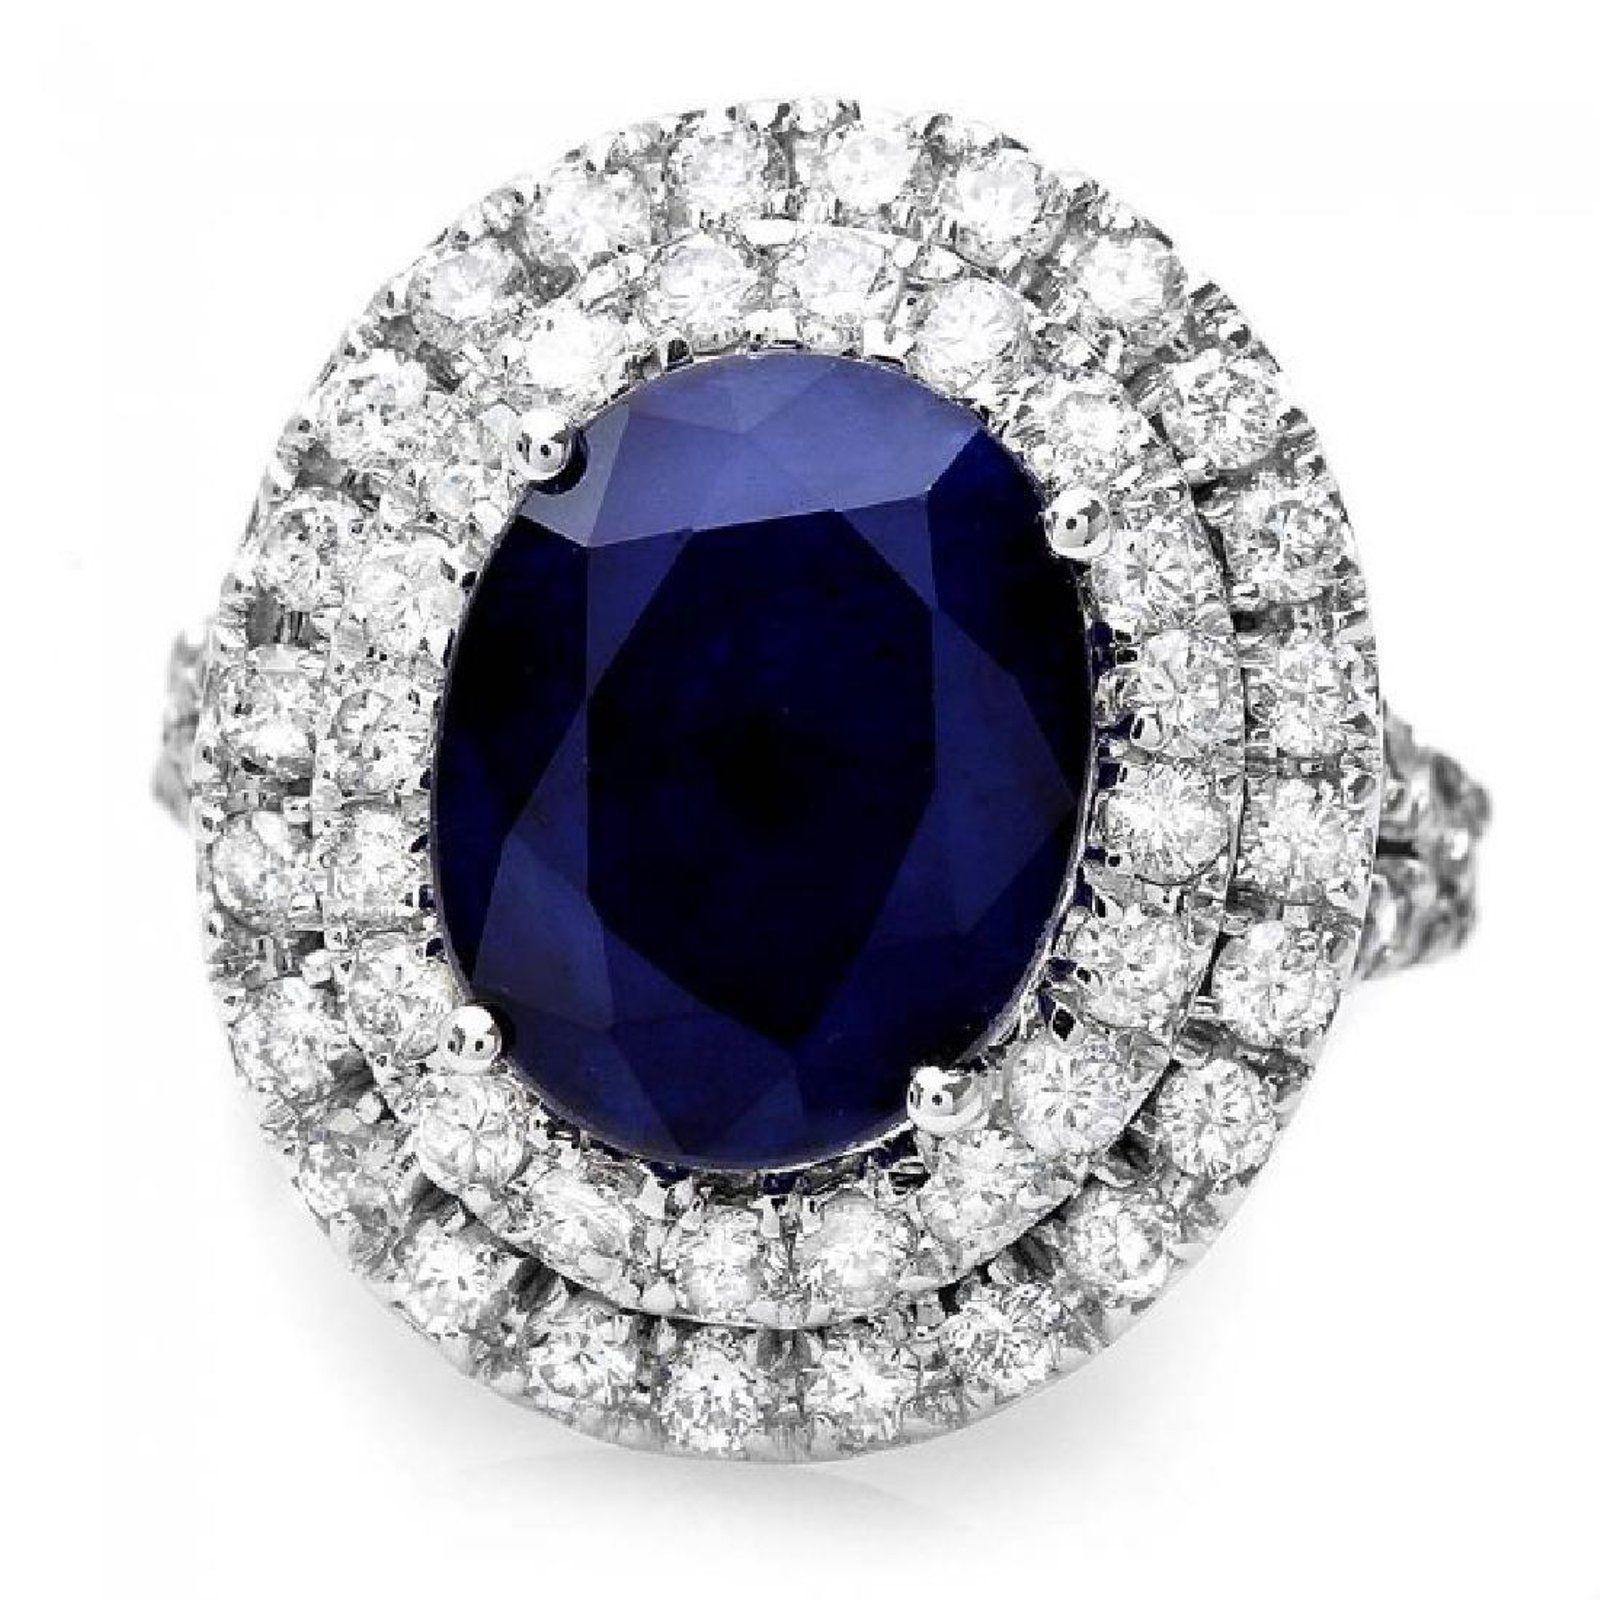 7.40 Carats Exquisite Natural Blue Sapphire and Diamond 14K Solid White Gold Ring

Suggested Replacement Value $7,200.00

Total Blue Sapphire Weight is: Approx. 5.50 Carats

Sapphire Measures: Approx. 12 x 10mm

Sapphire Treatment: